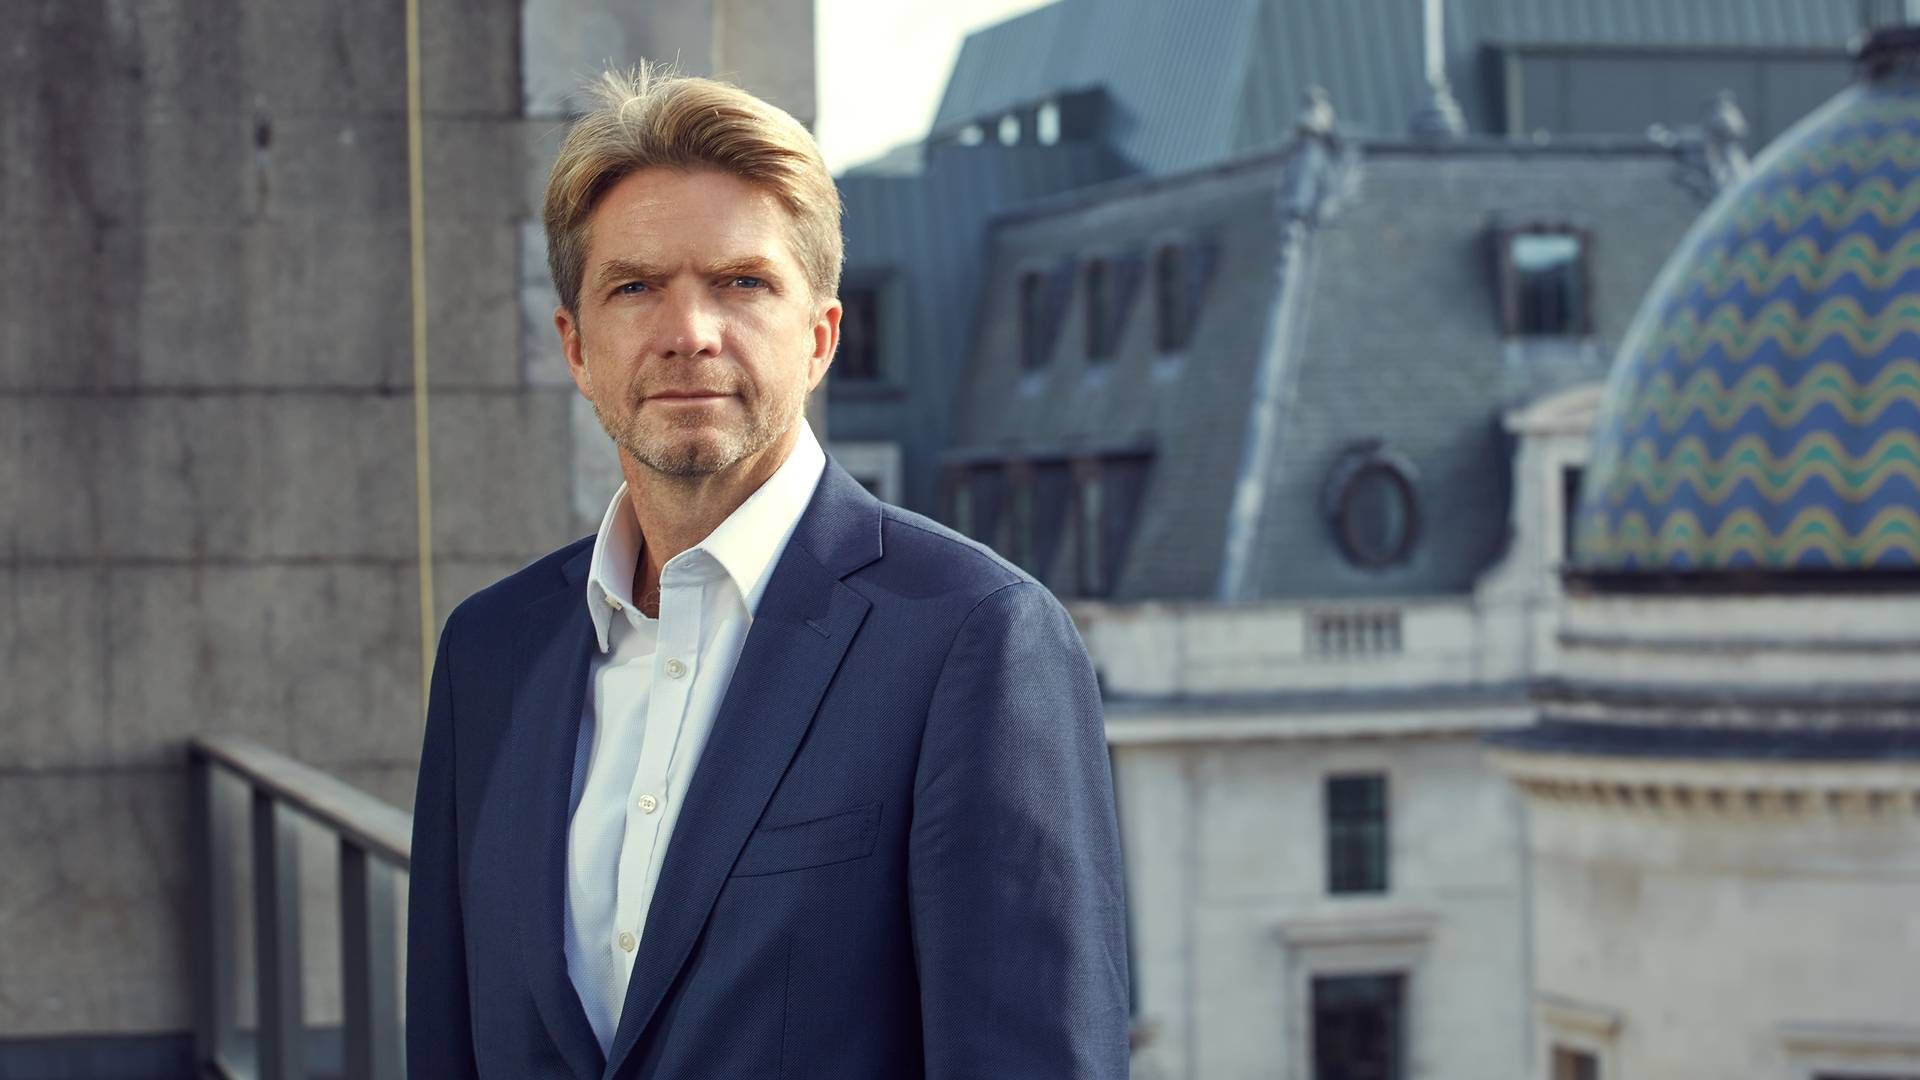 Andreas Povlsen is maritime chief at Hayfin. He has previously worked for Maersk, among others. | Photo: Hayfin Capital Management